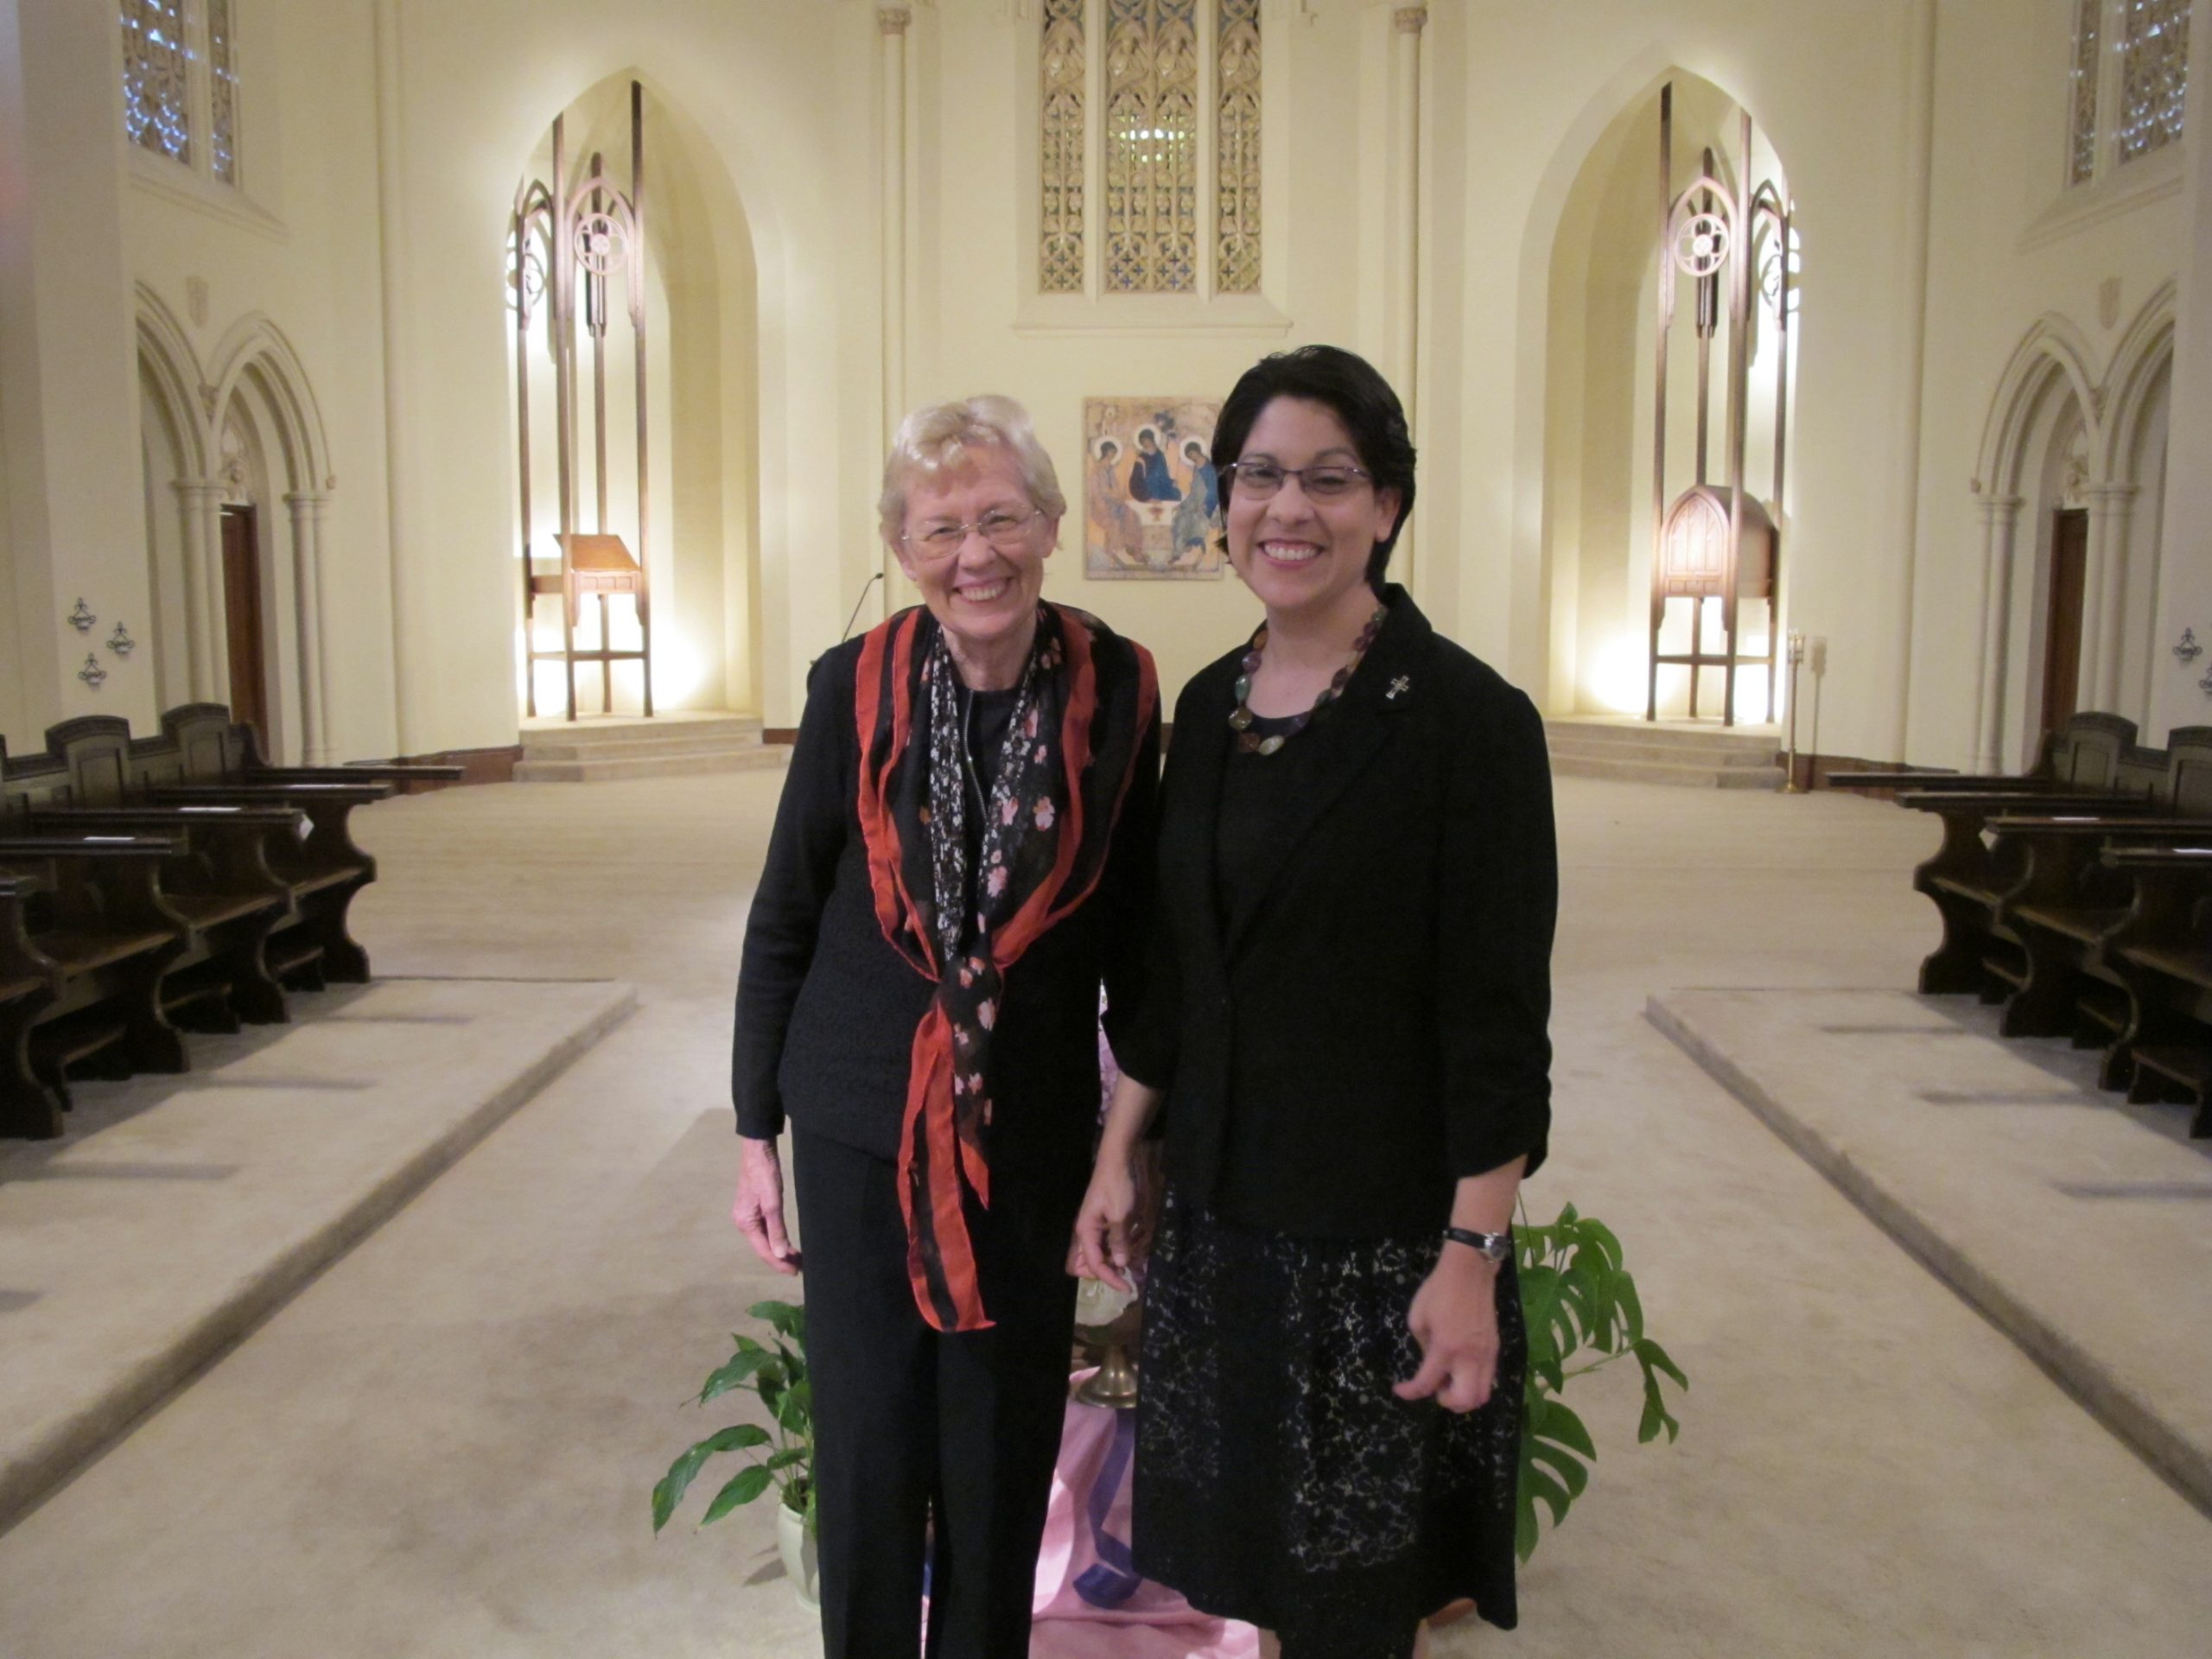 Sister Taryn and her mother in the Burlingame Chapel